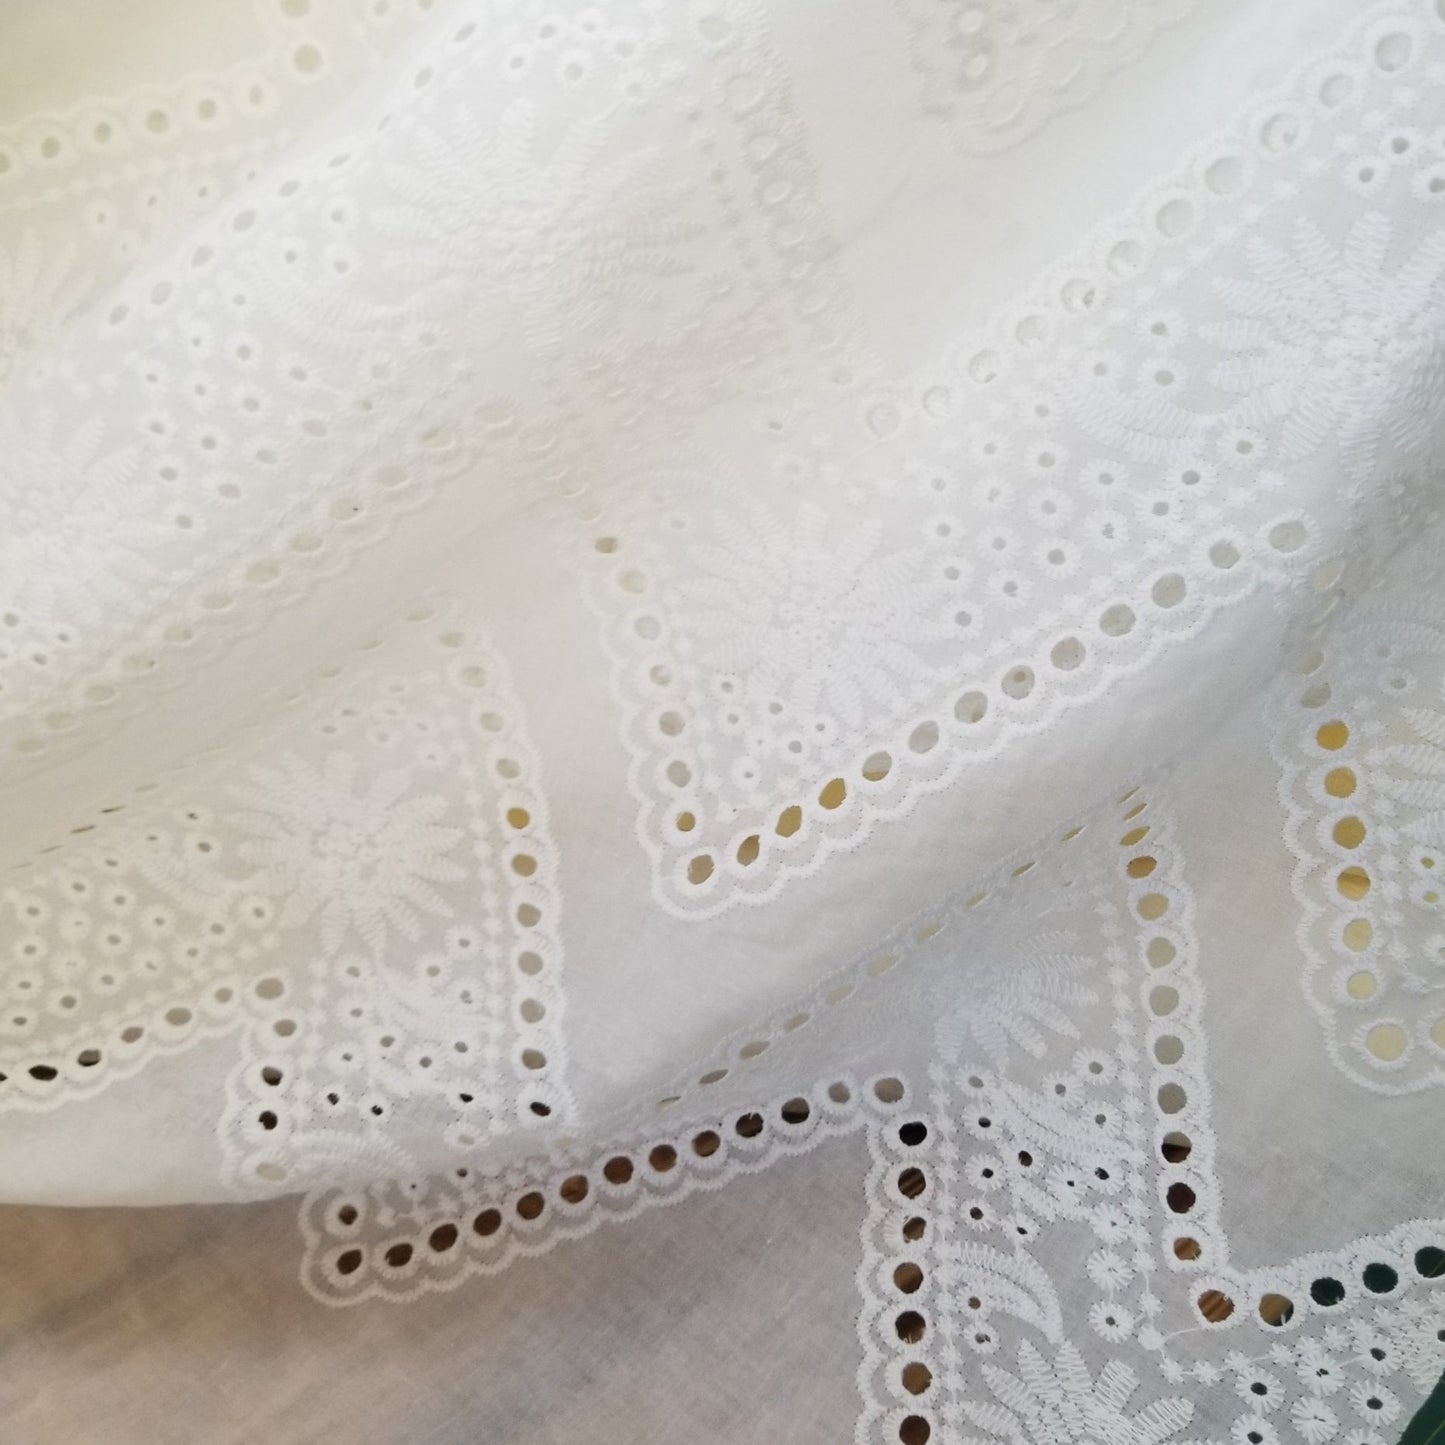 Designer Deadstock Bohemian Zig Zag White Eyelet Medium Weight Cotton Sheer Voile Woven- Sold by the yard